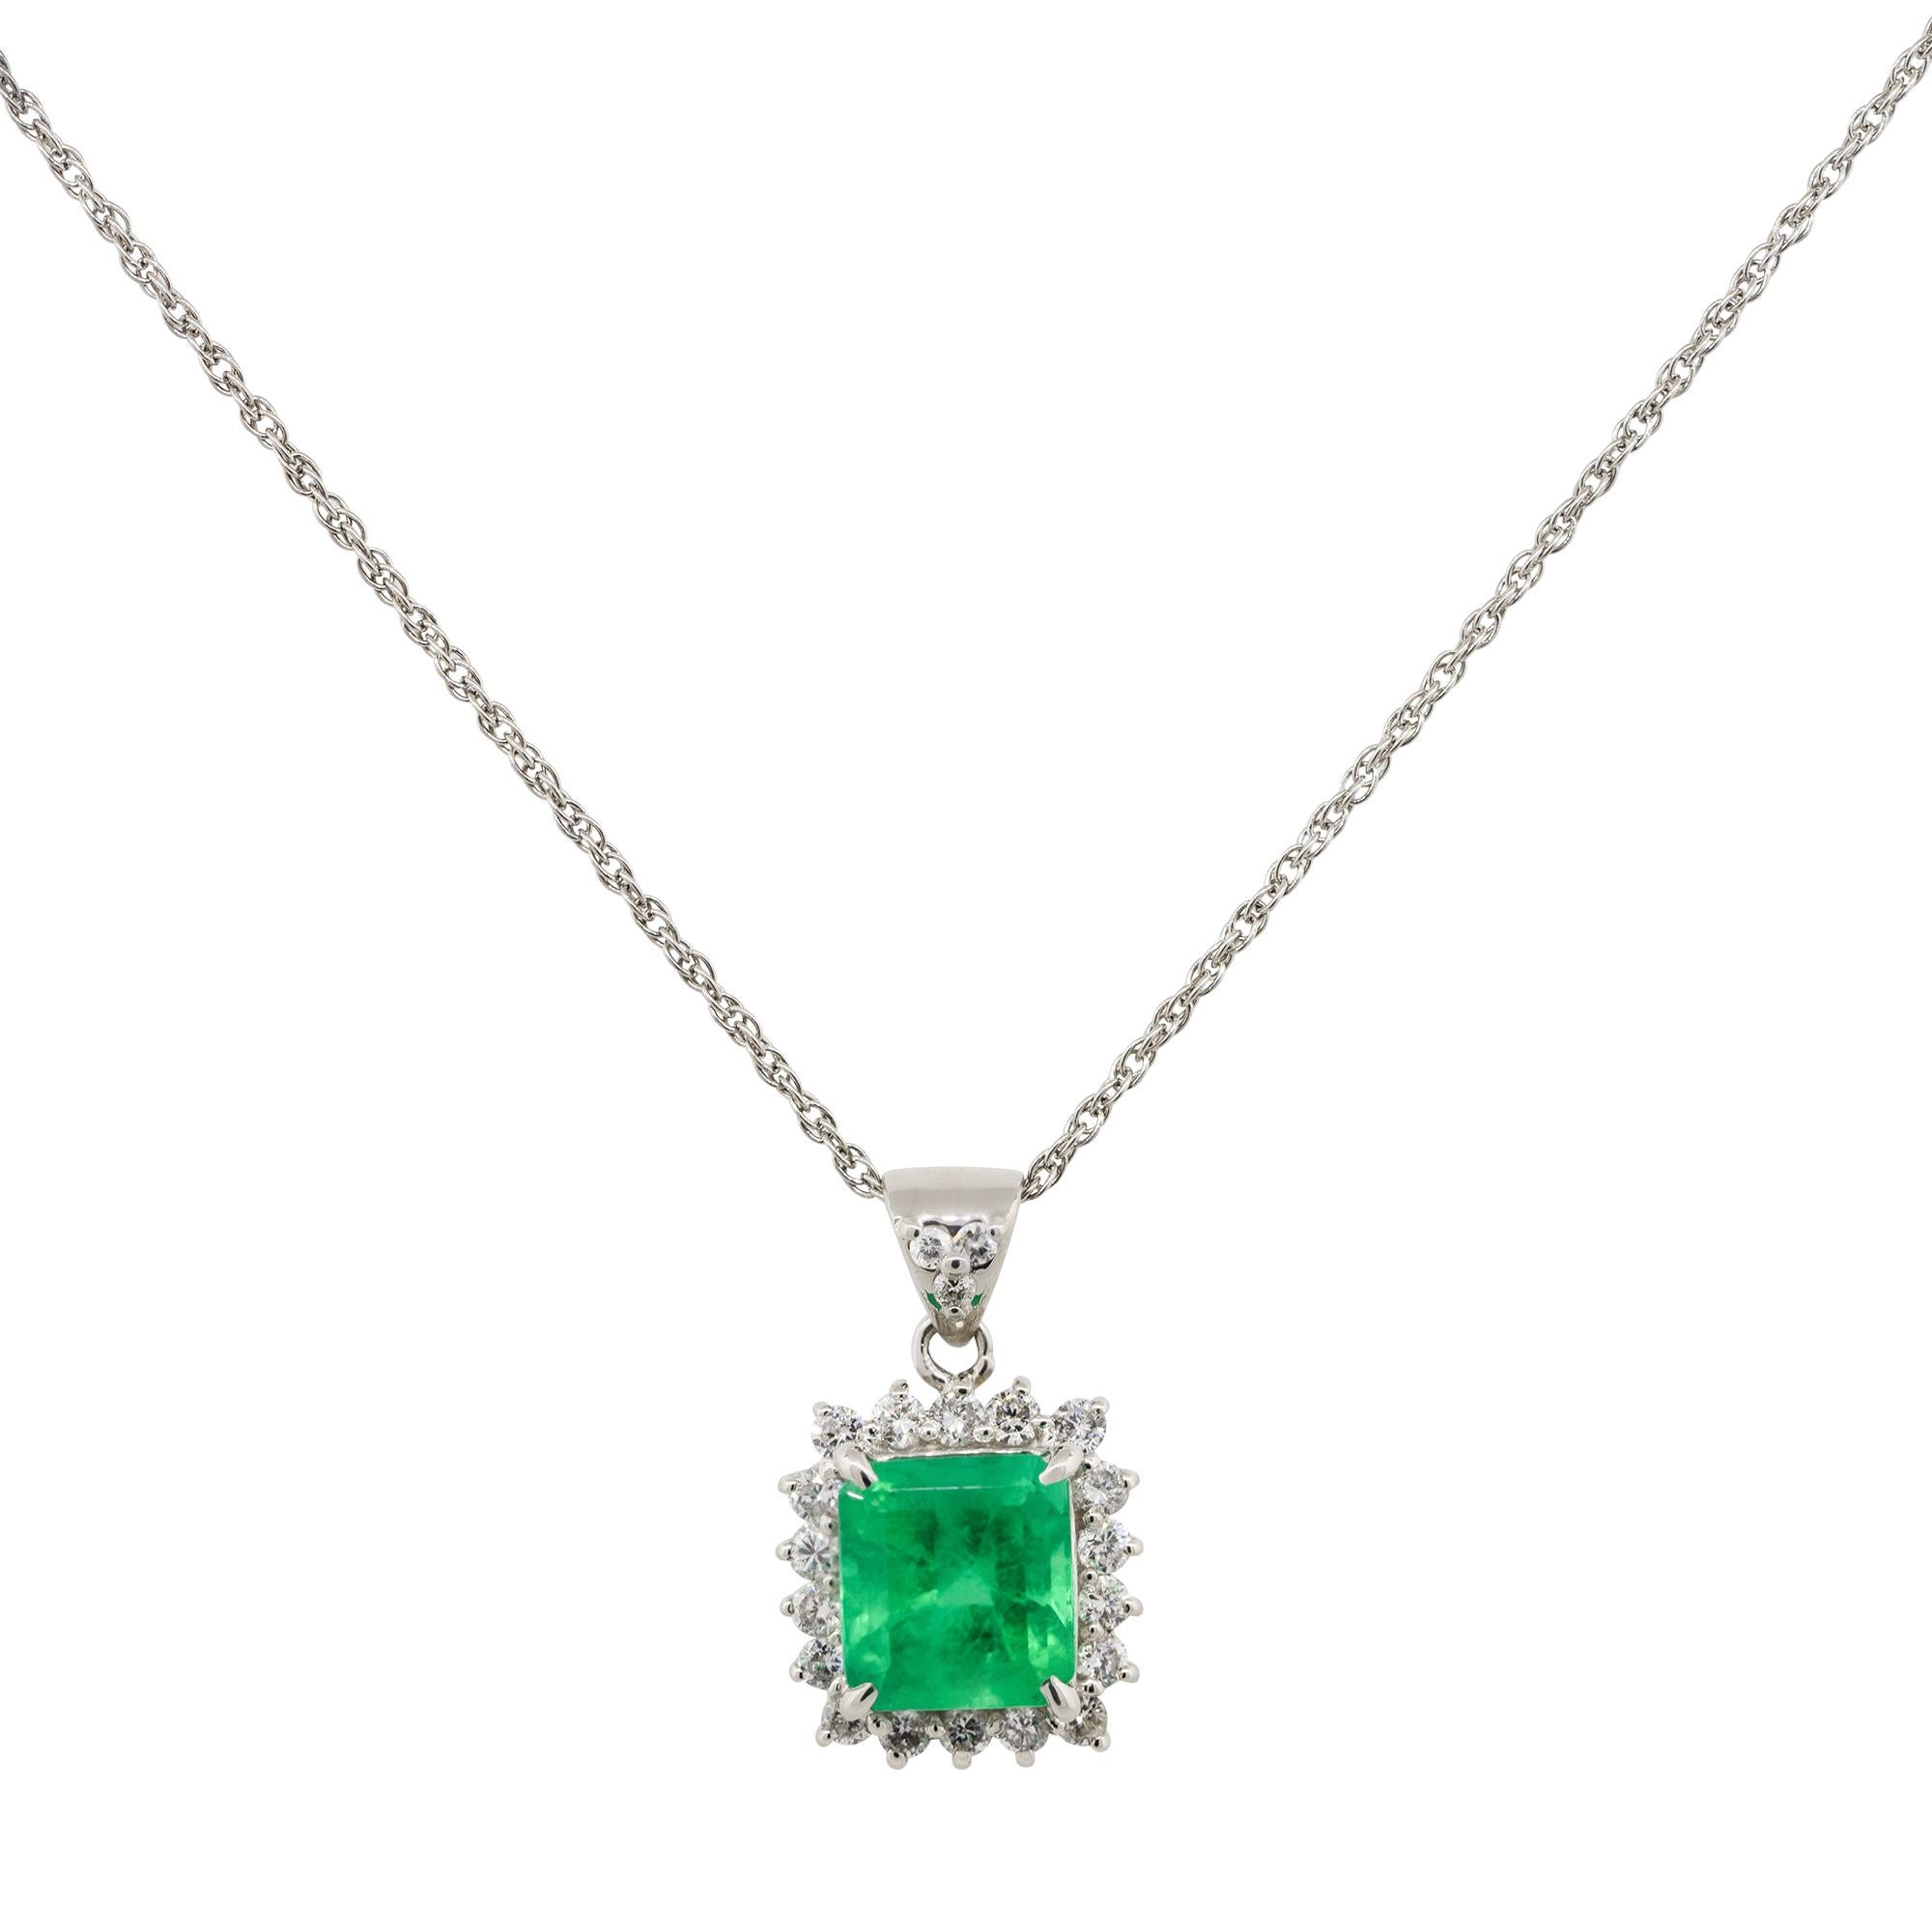 Material: Platinum
Diamond Details: Approx. 0.40ctw of round cut Diamonds. Diamonds are G/H in color and VS in clarity
Gemstone Details: Approx. 2.07ctw Emerald gemstone
Clasps: Lobster Clasp
Total Weight: 5.8g (3.7dwt)
Measurements: 10mm x 17mm x